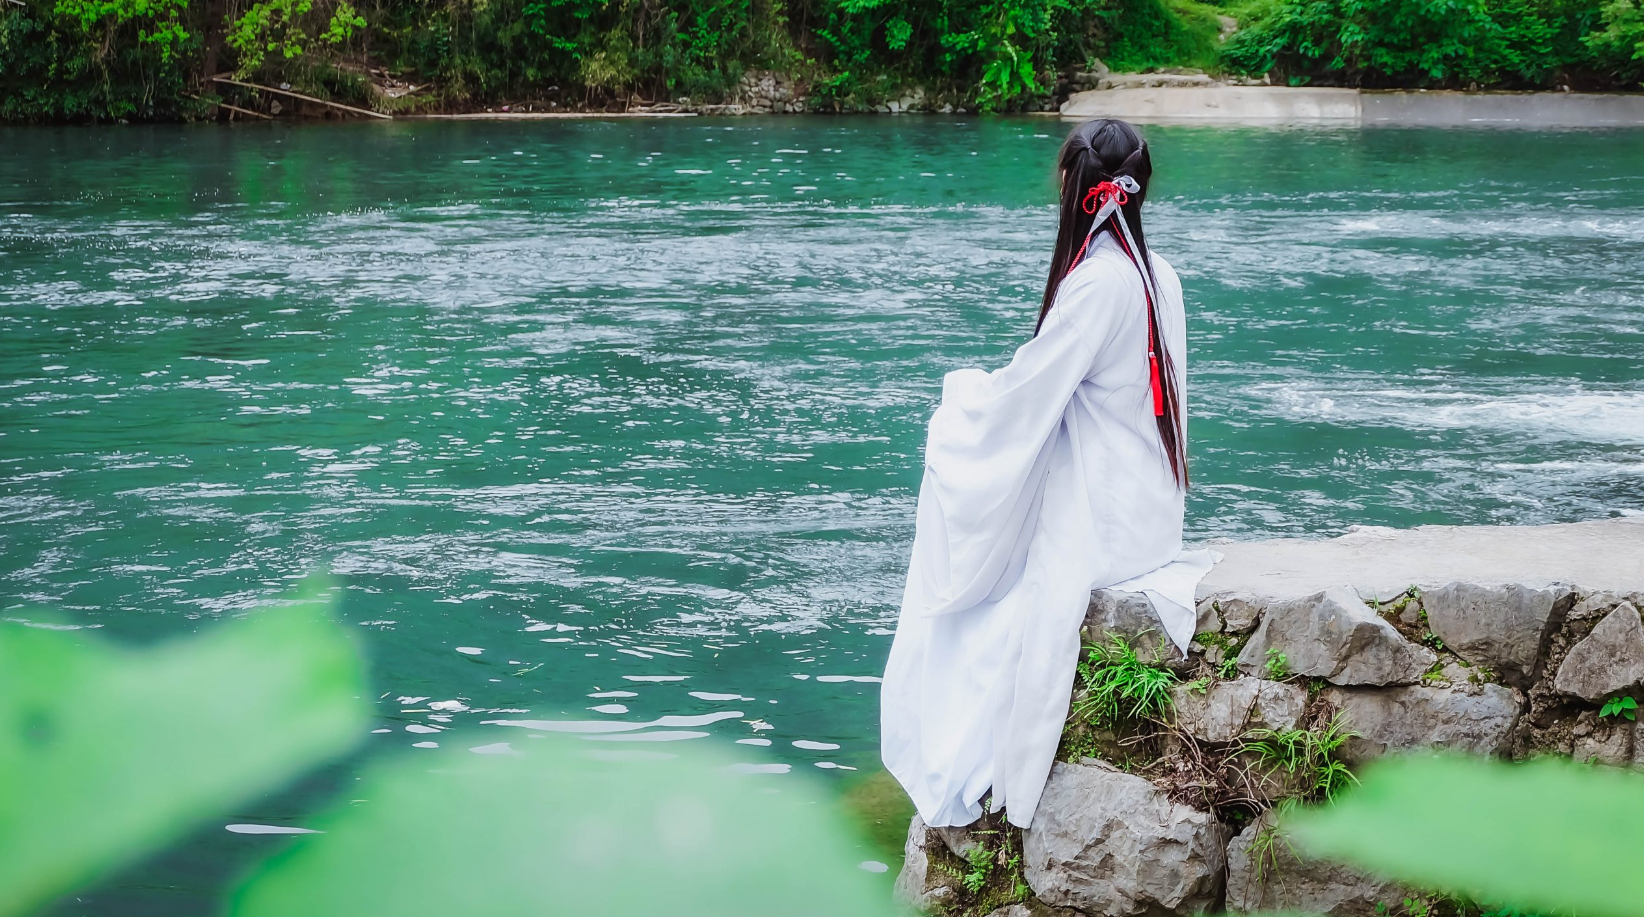 What is special about Hanfu